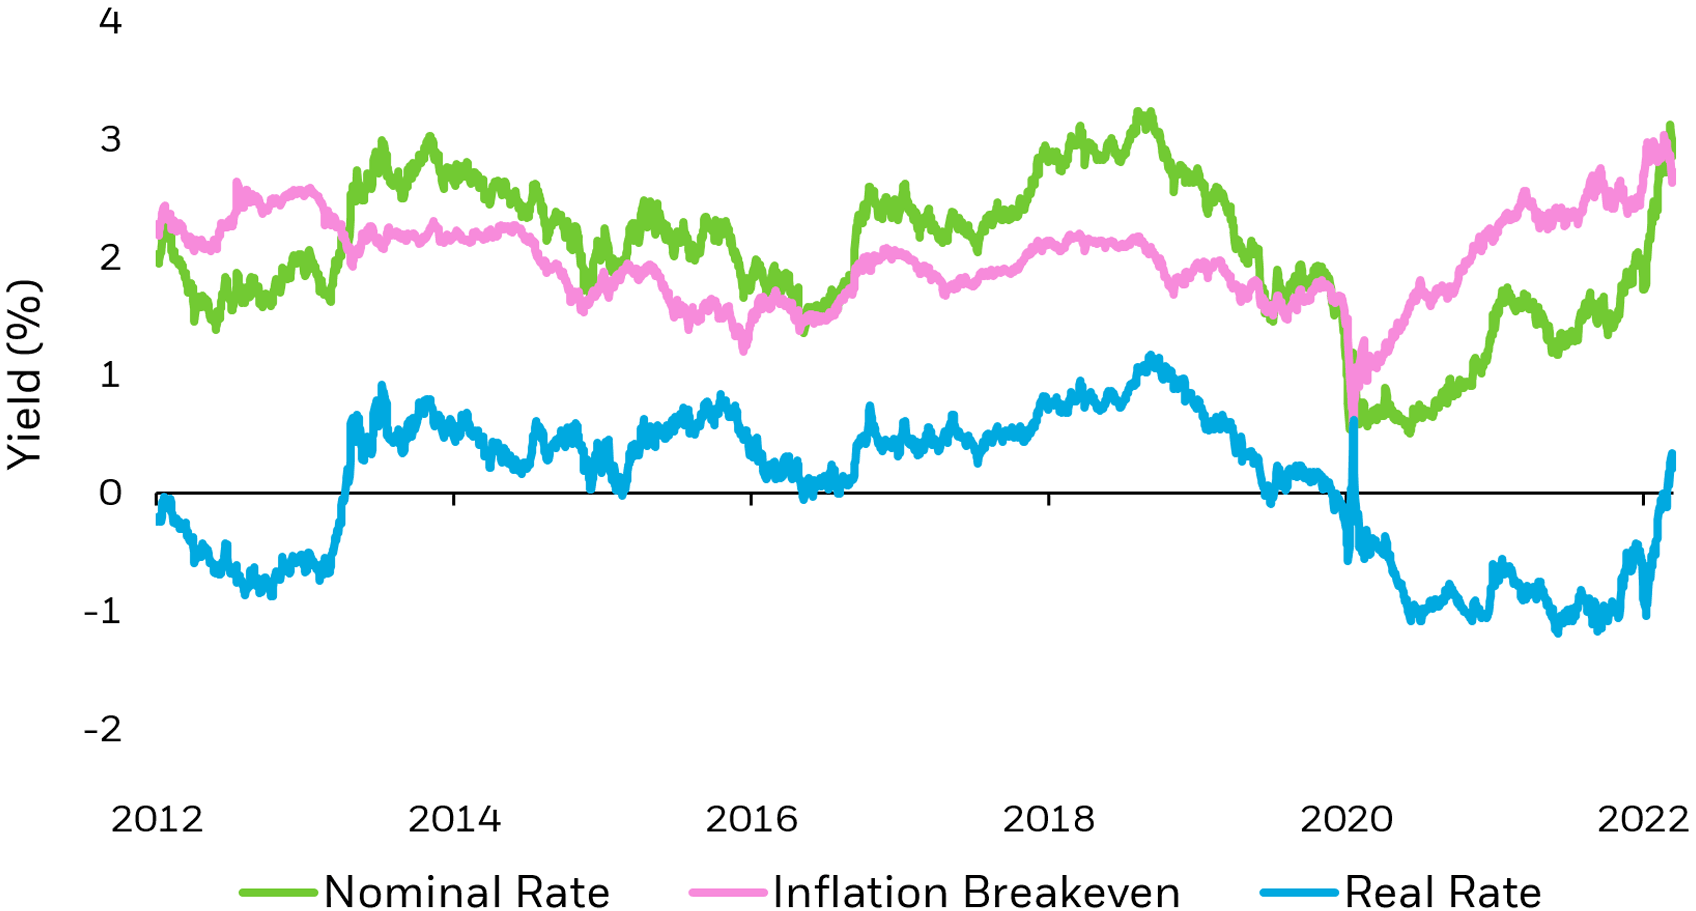 Line chart exhibiting three lines that represent changes in the yield of the nominal rate, inflation breakeven rate, and real rate between 2012 and May 2022.